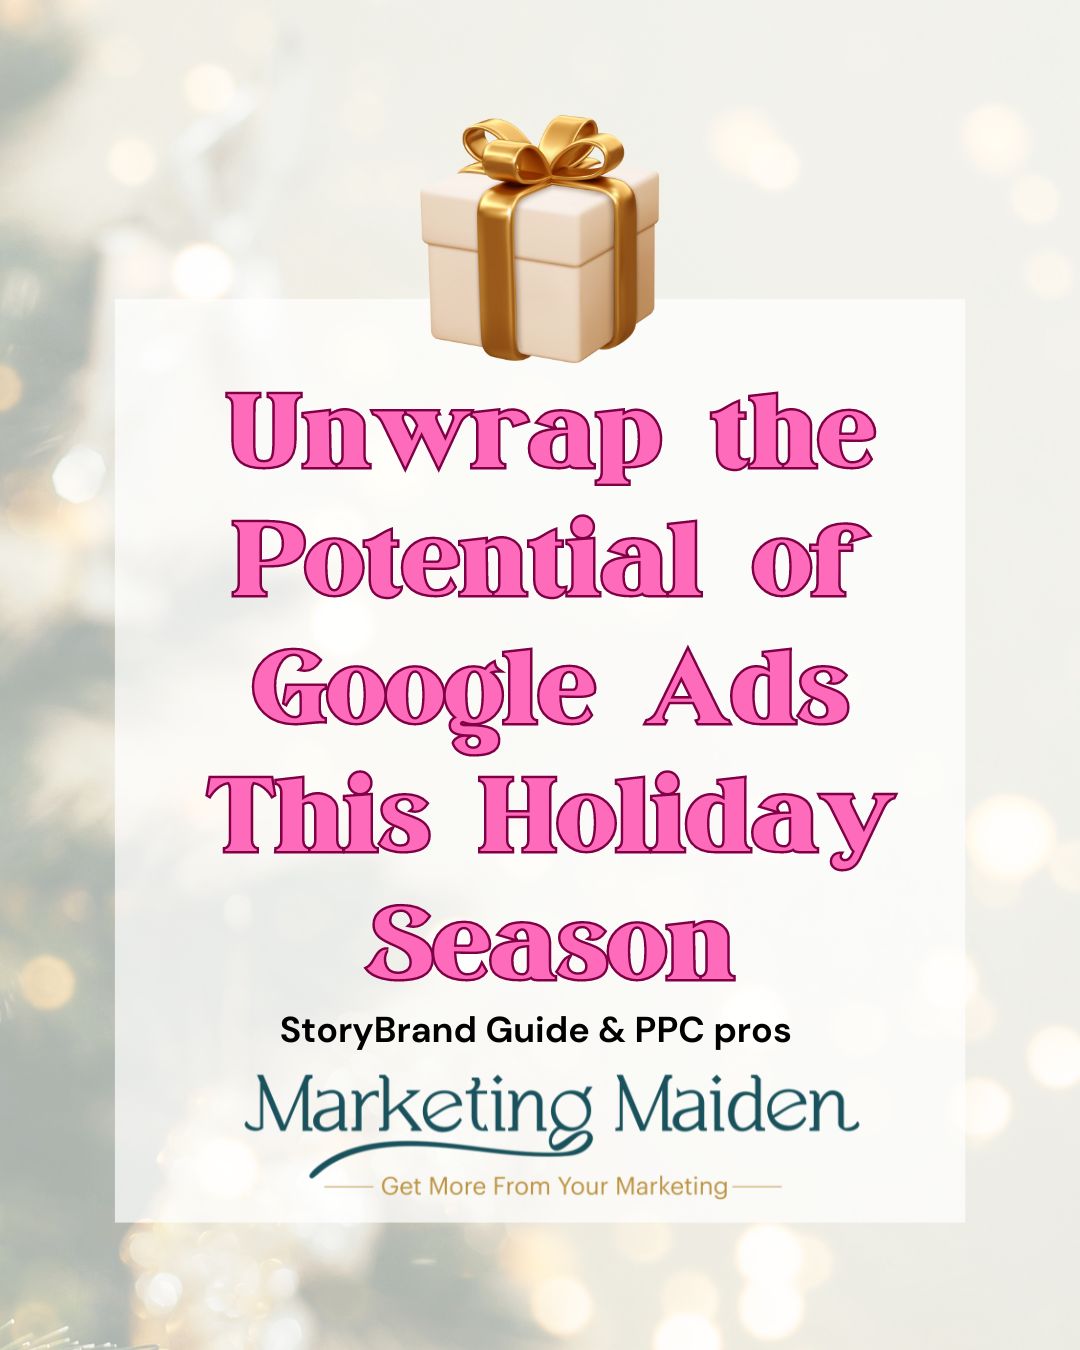 Unwrap the Potential of Google Ads This Holiday Season